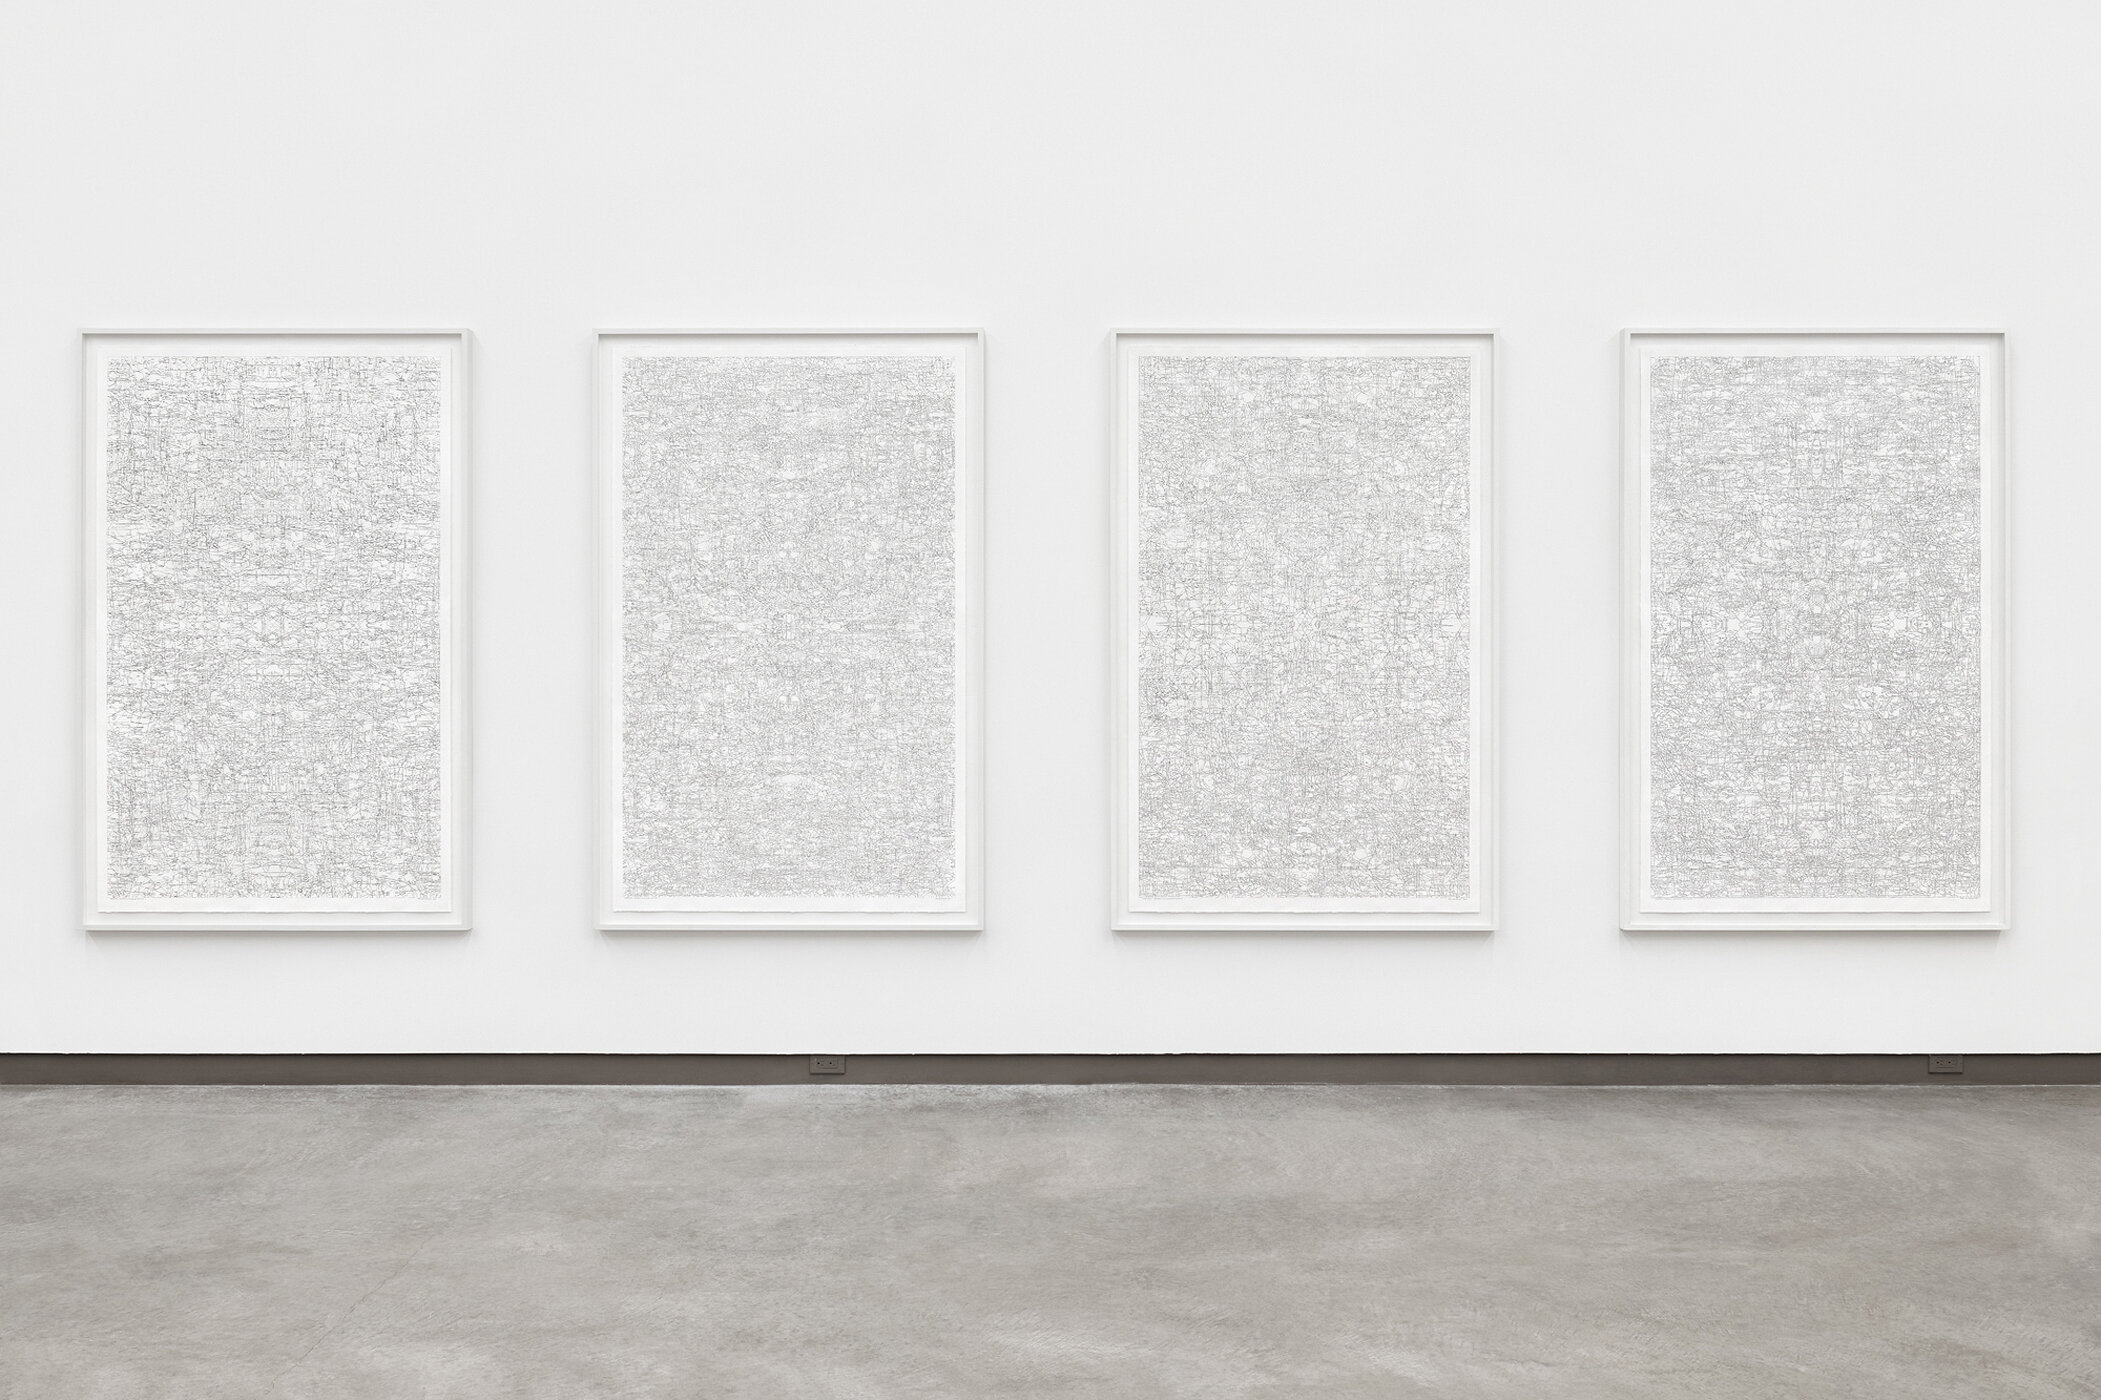  [installation]  Schematic: Fourfold, Flanking Positions I-IV,  2020 Graphite on Rising Stonehenge Paper  [each} Image size: 69 x 42; paper size: 72 x 44 ½ inches  